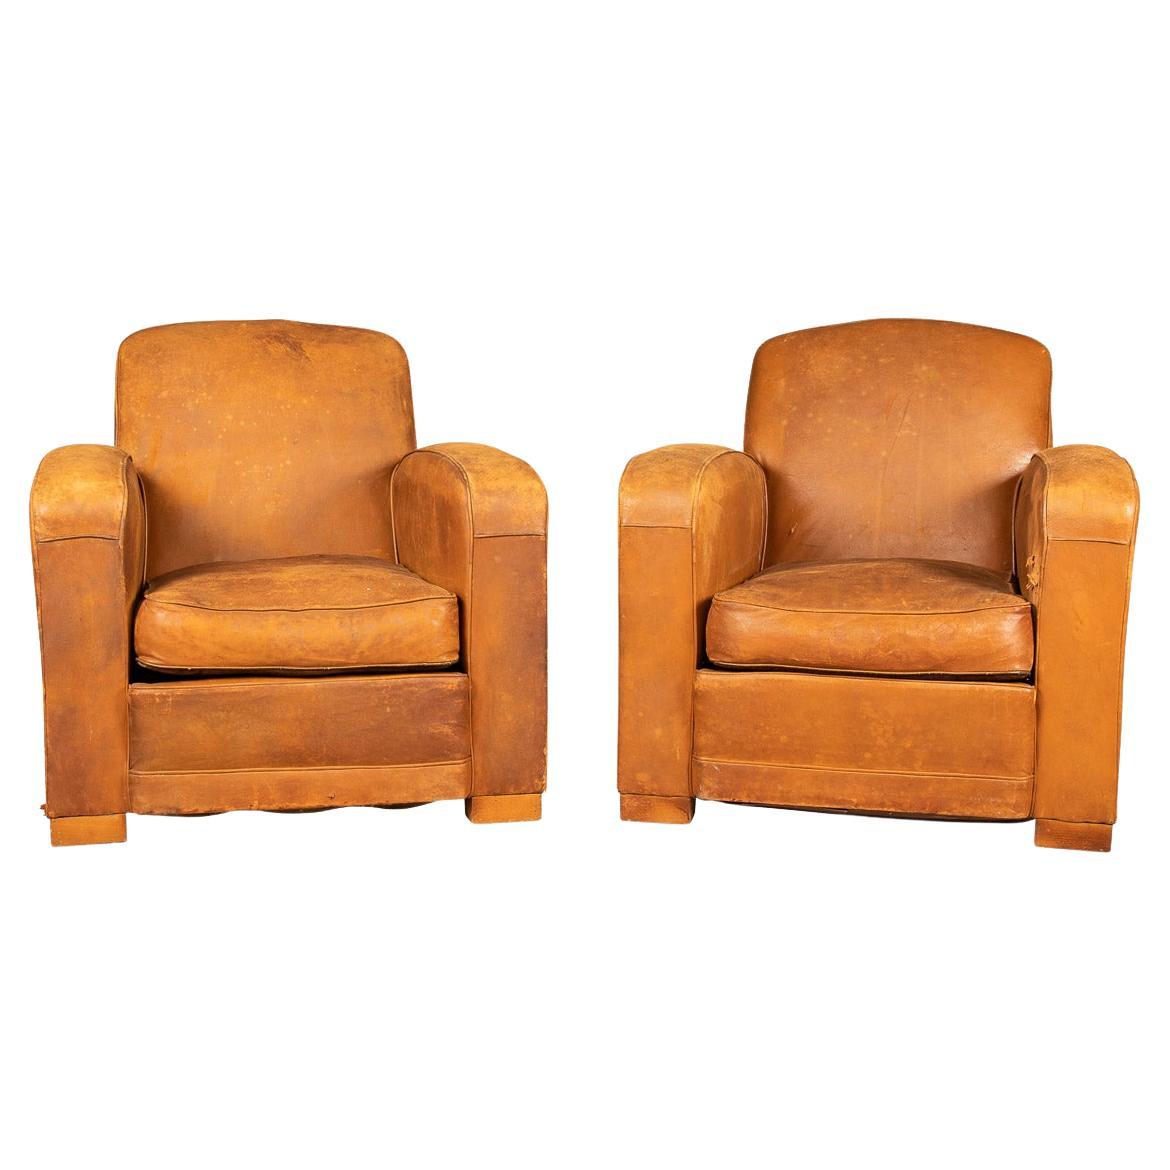 20th Century Pair Of Art Deco Style French Leather Club Chairs